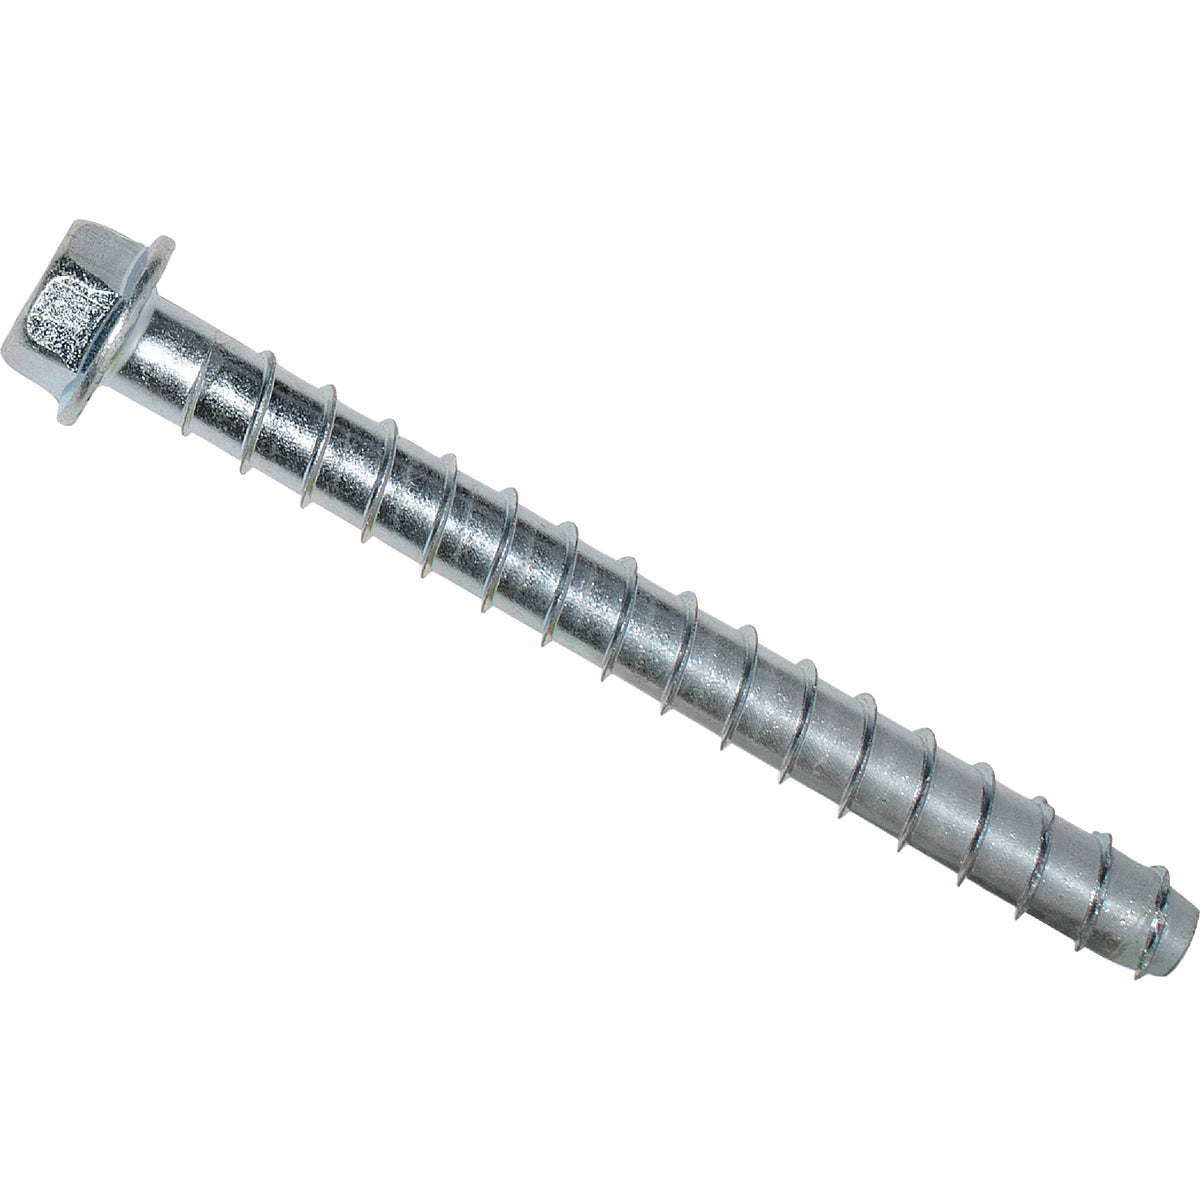 Simpson Strong-Tie Titen HD 1/2 In. x 4 In. Hex Washer Concrete Screw Anchor (20-Count)